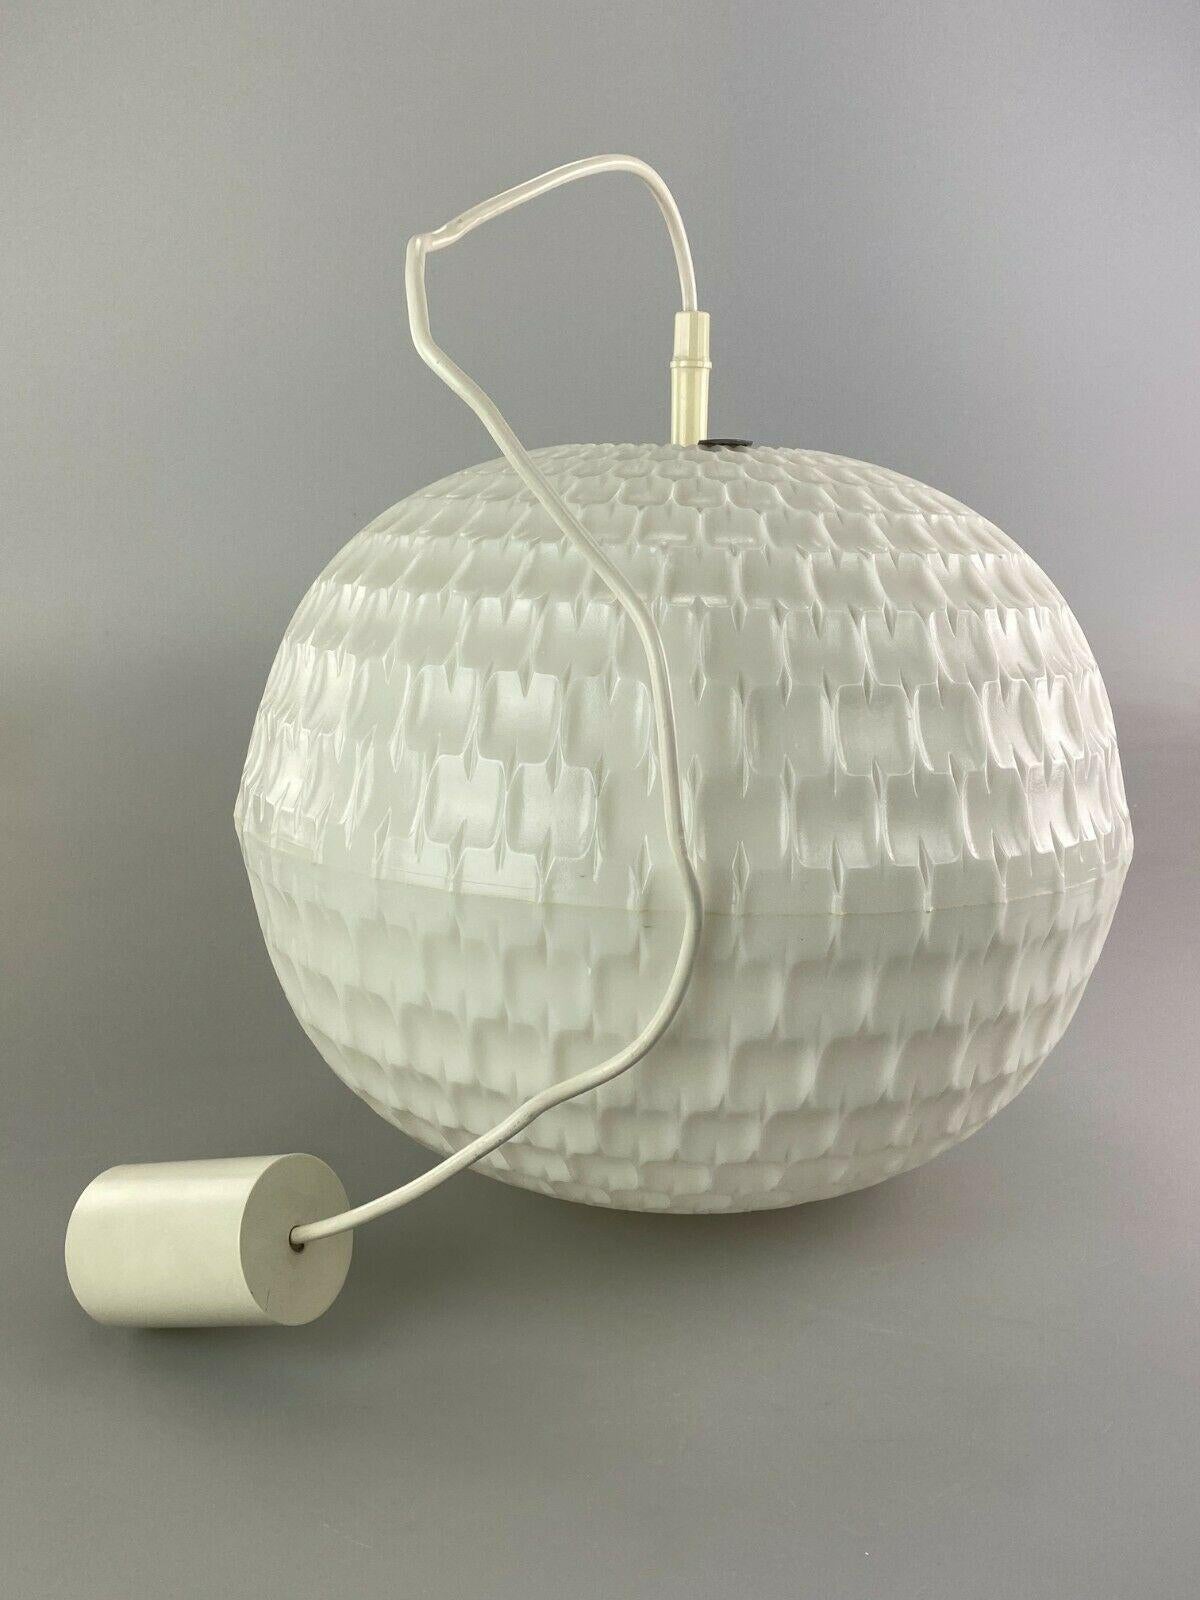 60s 70s Erco Lamp Light Honeycomb Ceiling Lamp Plastic Space Age Design For Sale 2